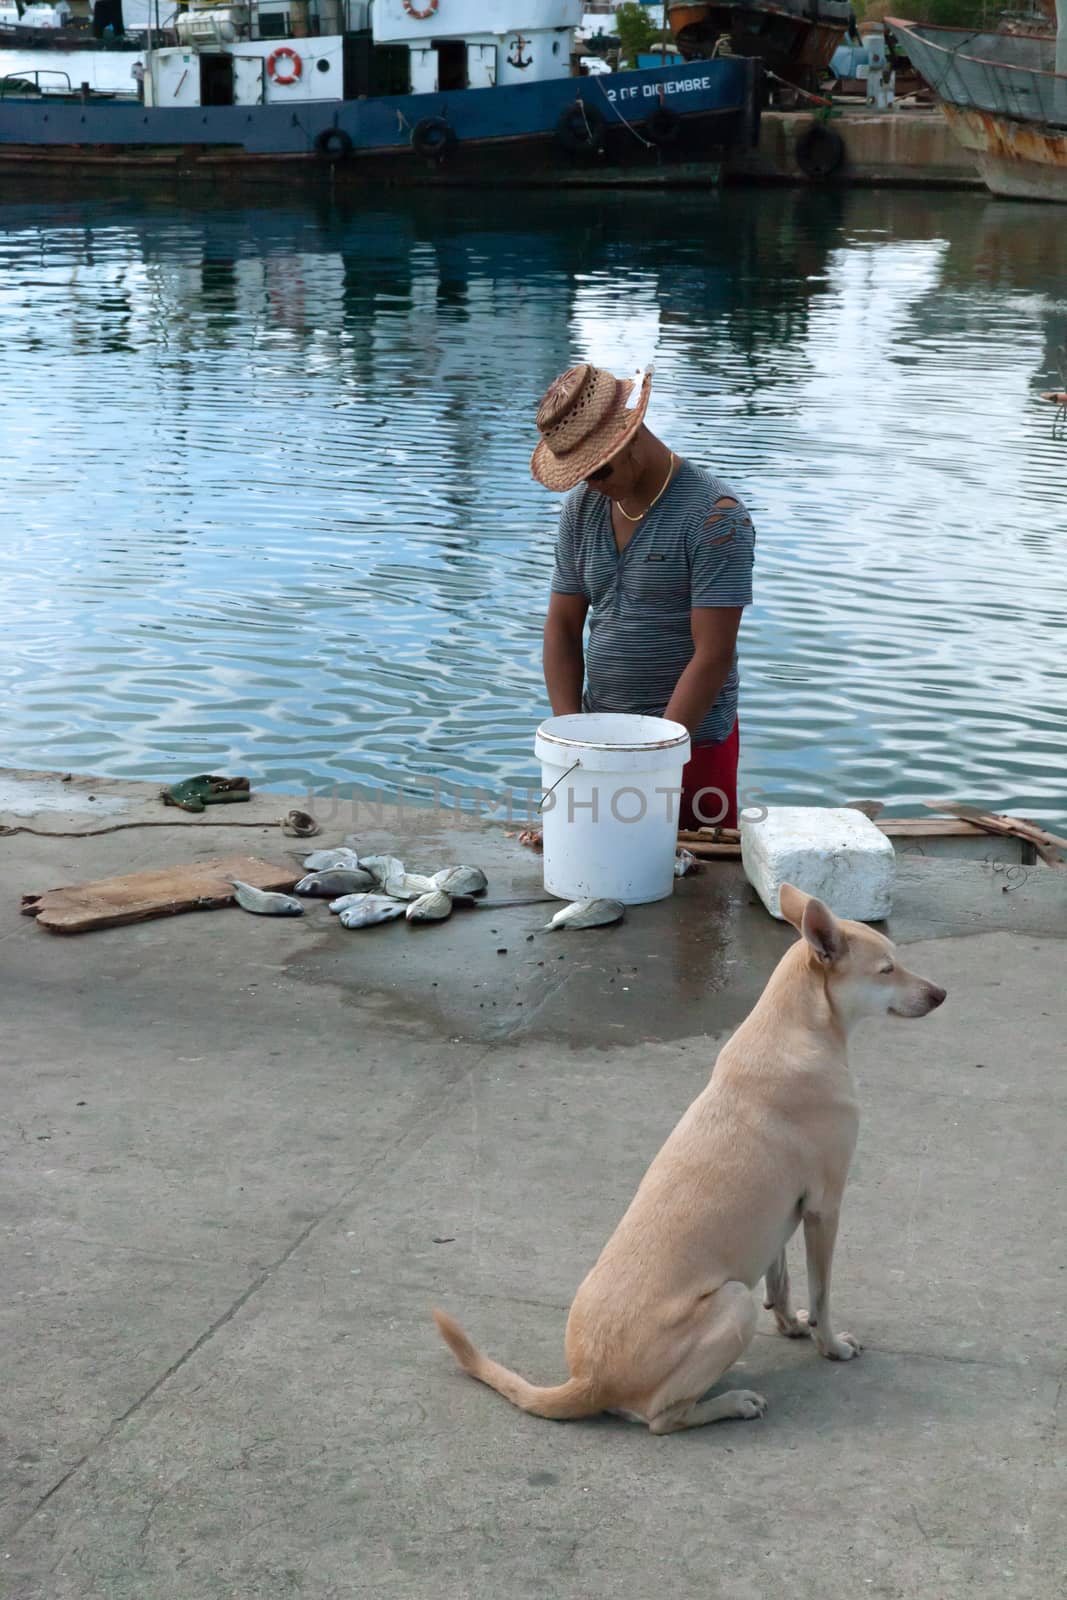 Cienfuegos, Cuba - 1 February 2015: Fisherman with a dog working on a pier